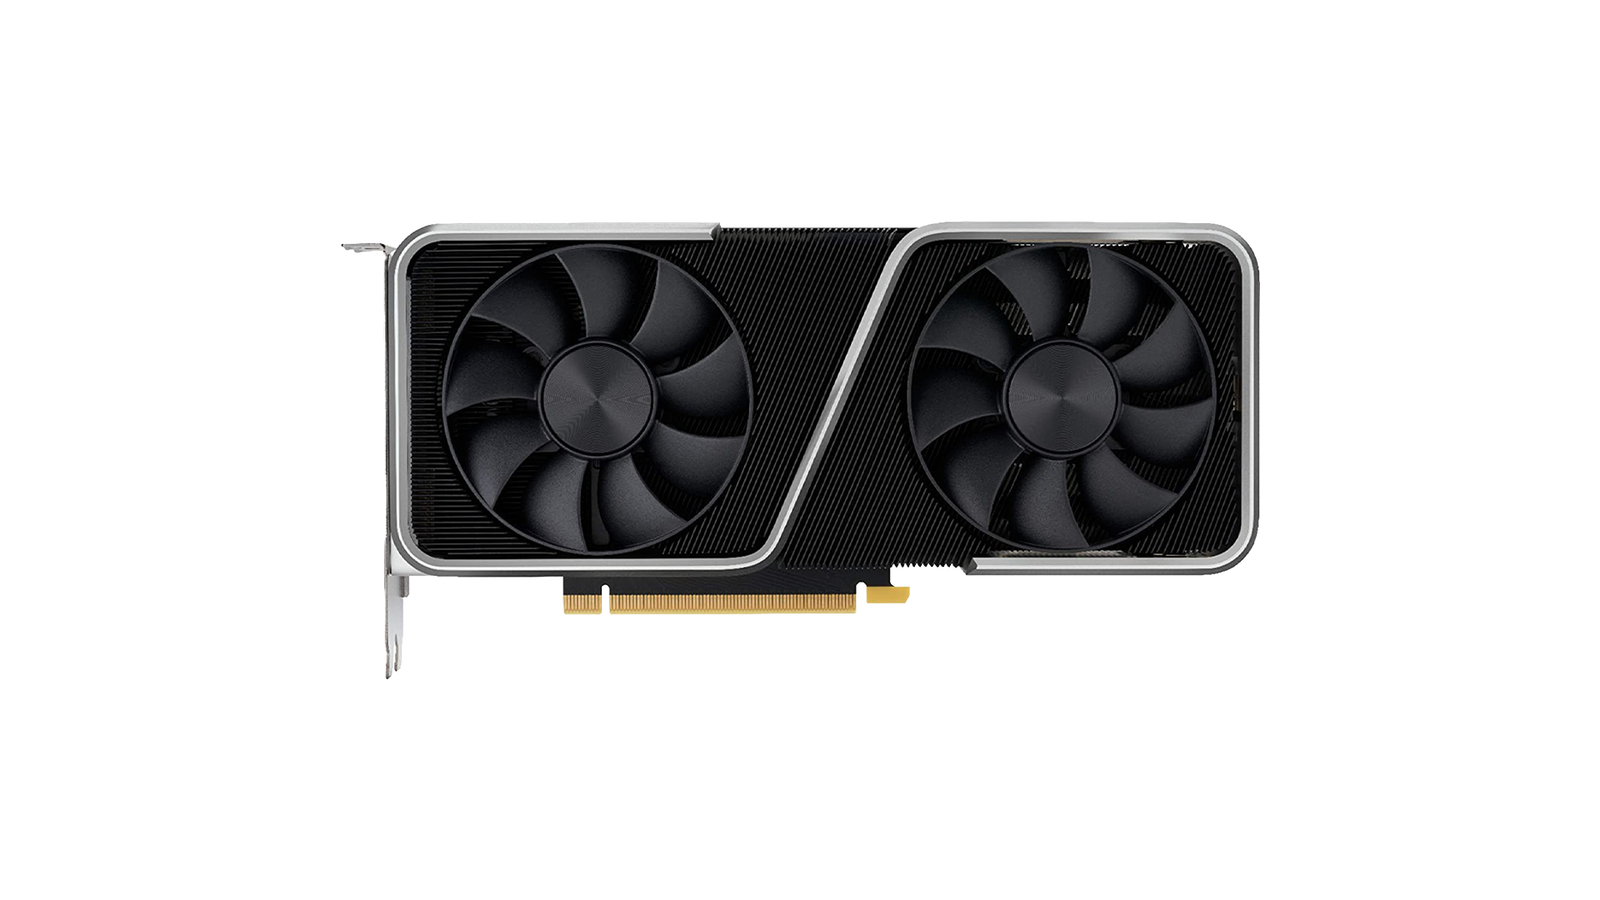 Nvidia GeForce RTX 3060 Ti - The best graphics card for gaming at 1080p